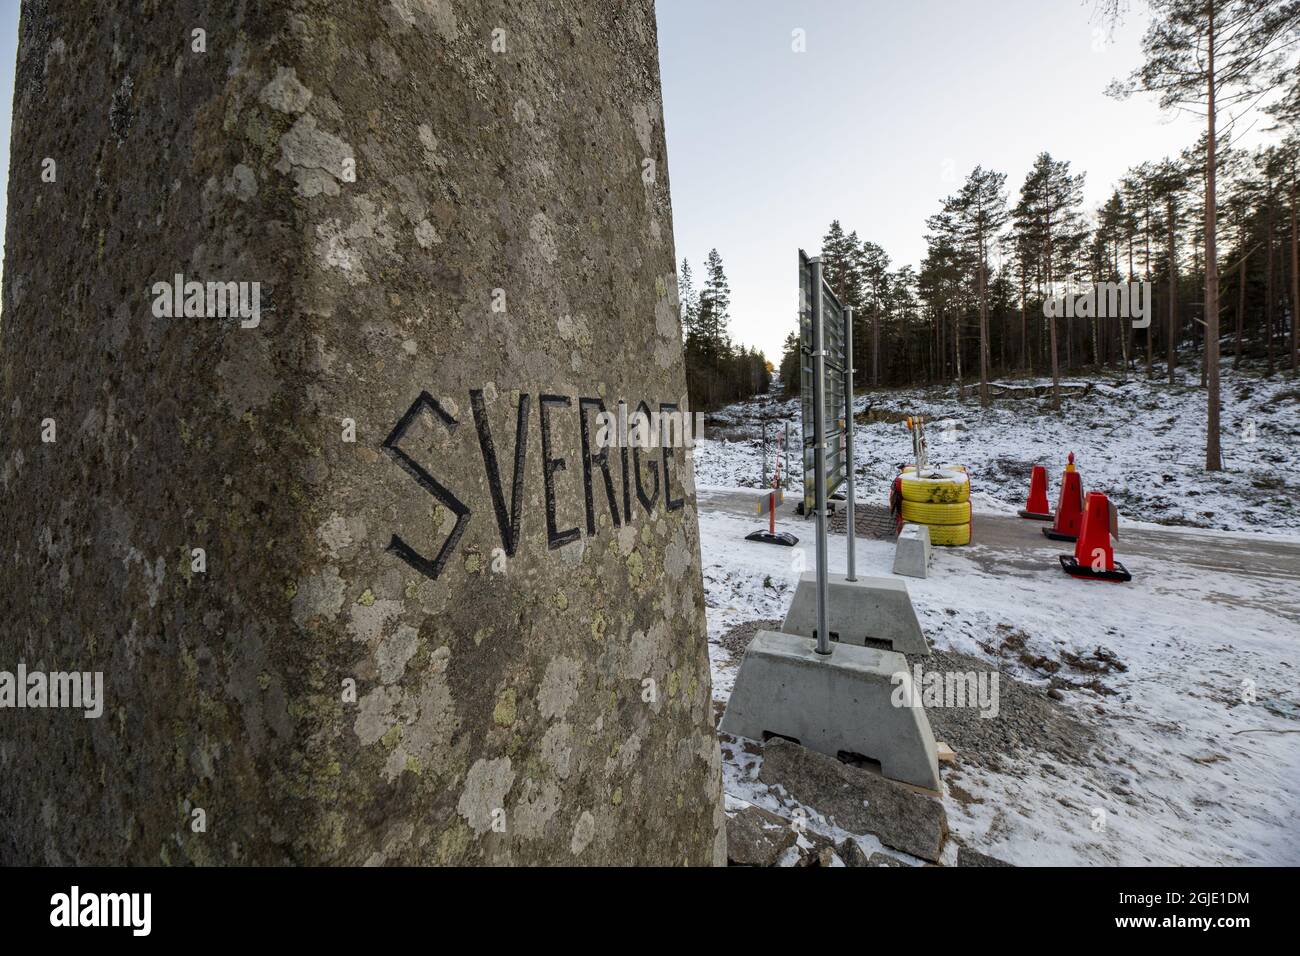 HAVEDALEN 2021-02-11 The border between Sweden and Norway at Havedalen has been closed in an effort to stop the spread of the Coronavirus (Covid-19). Photo: Lassa Edwartz / TT code 20785  Stock Photo